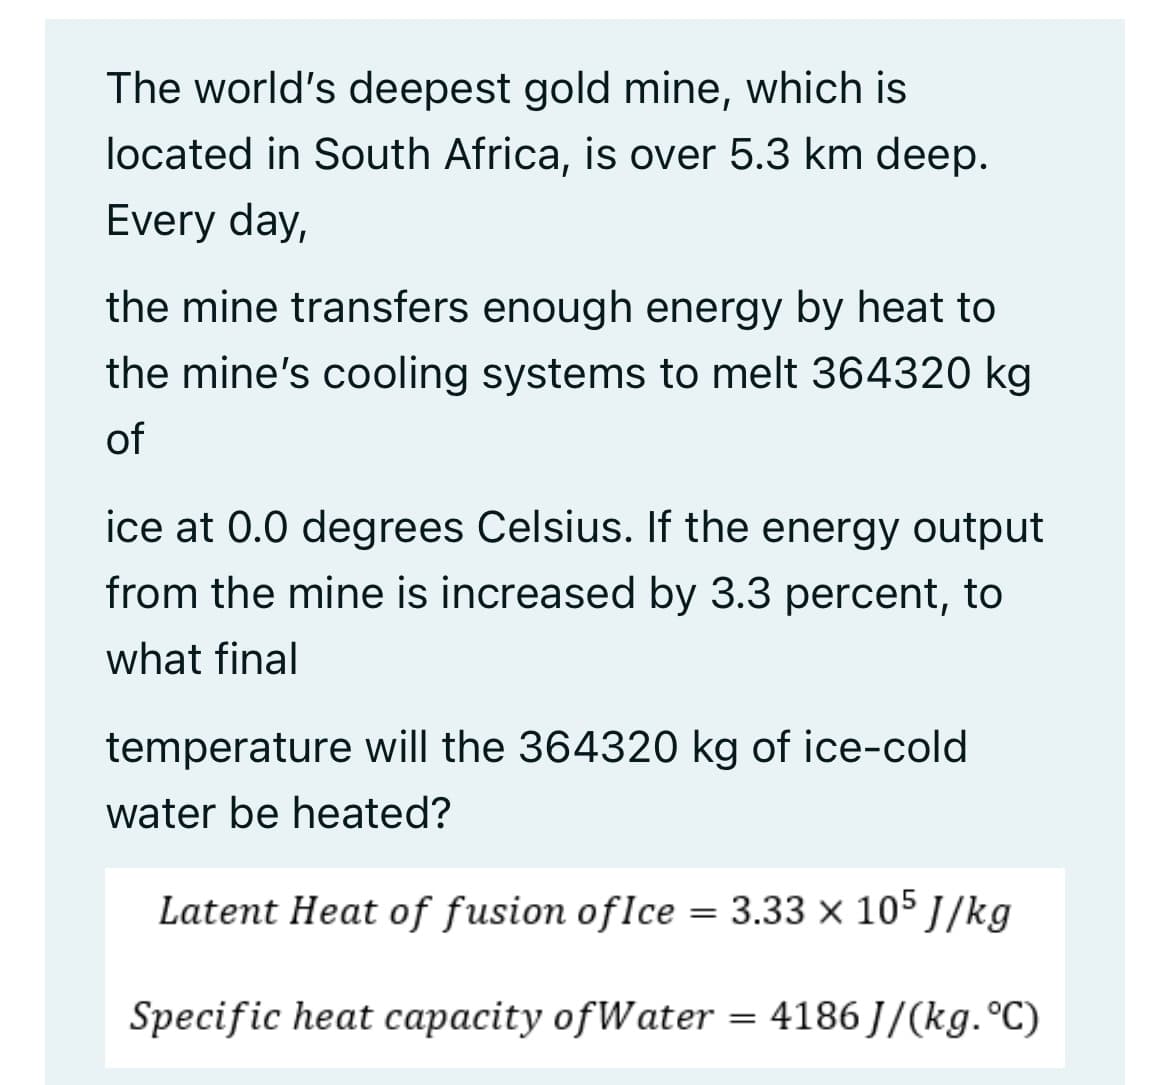 The world's deepest gold mine, which is
located in South Africa, is over 5.3 km deep.
Every day,
the mine transfers enough energy by heat to
the mine's cooling systems to melt 364320 kg
of
ice at 0.0 degrees Celsius. If the energy output
from the mine is increased by 3.3 percent, to
what final
temperature will the 364320 kg of ice-cold
water be heated?
Latent Heat of fusion of Ice = 3.33 × 105 J/kg
Specific heat capacity of Water = 4186J/(kg.°C)